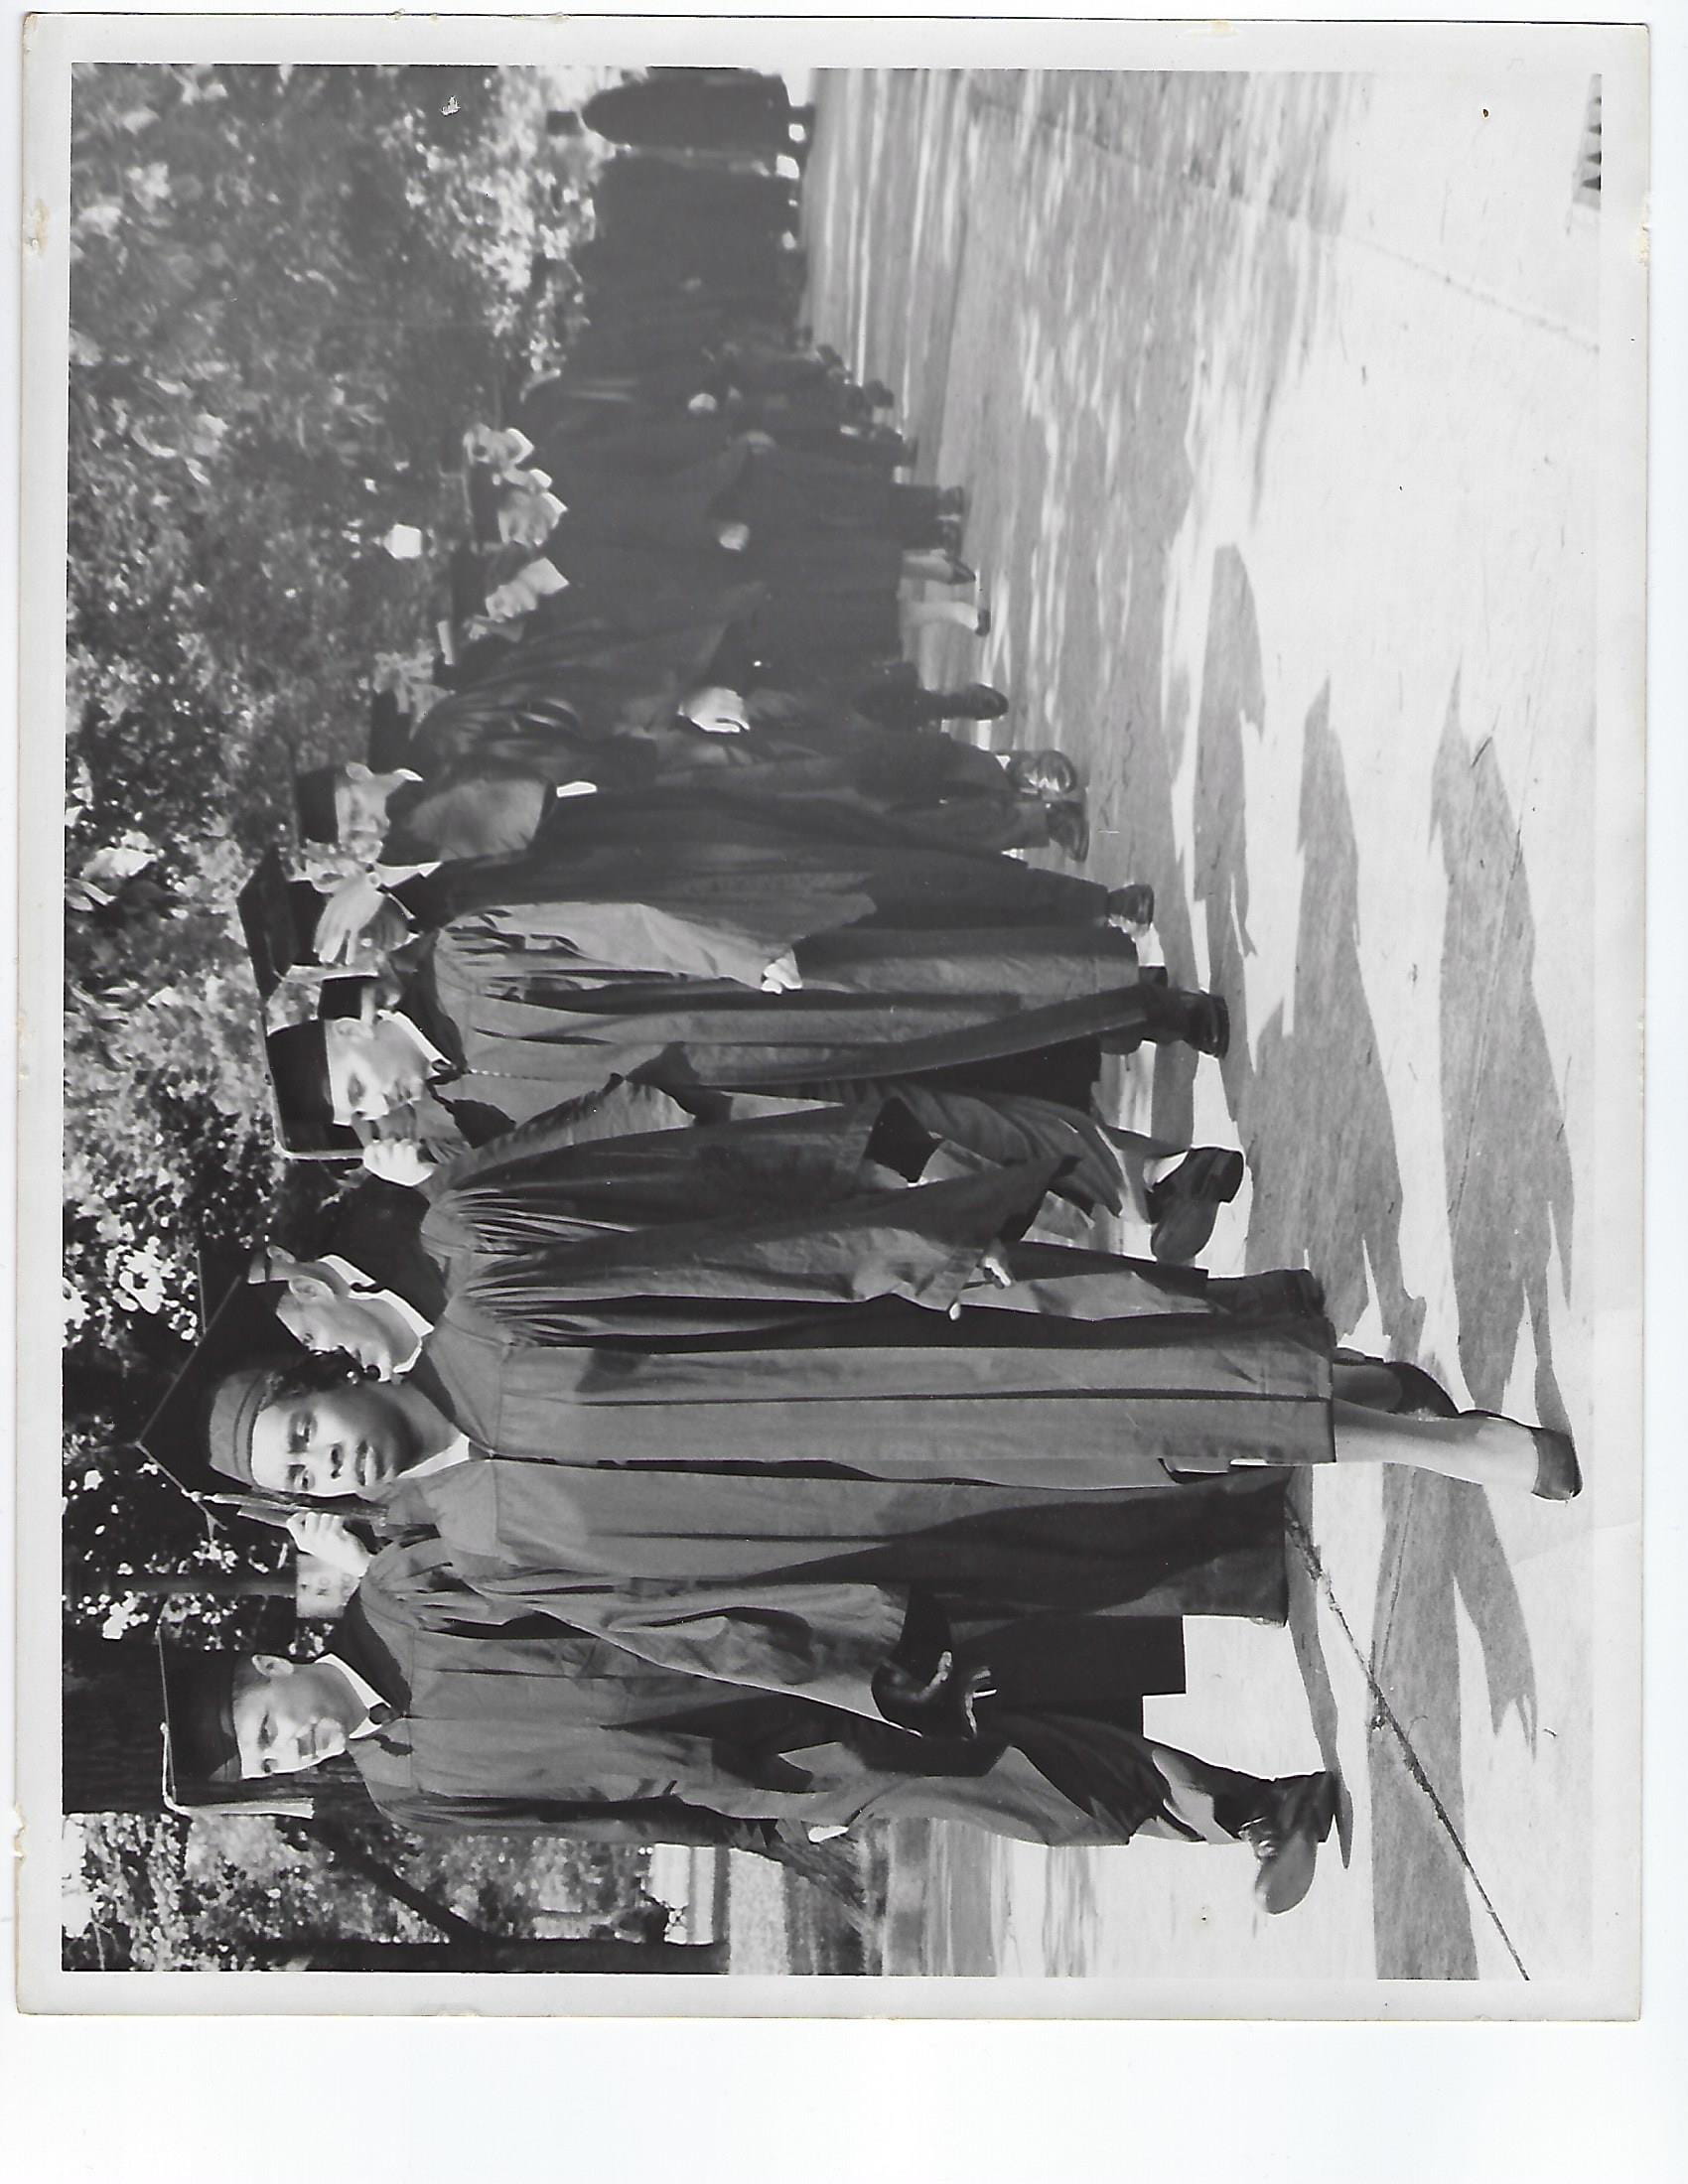 Norma Goodwin, M’61, processing to the Mosque, where the Class of 1961’s graduation ceremony was held.